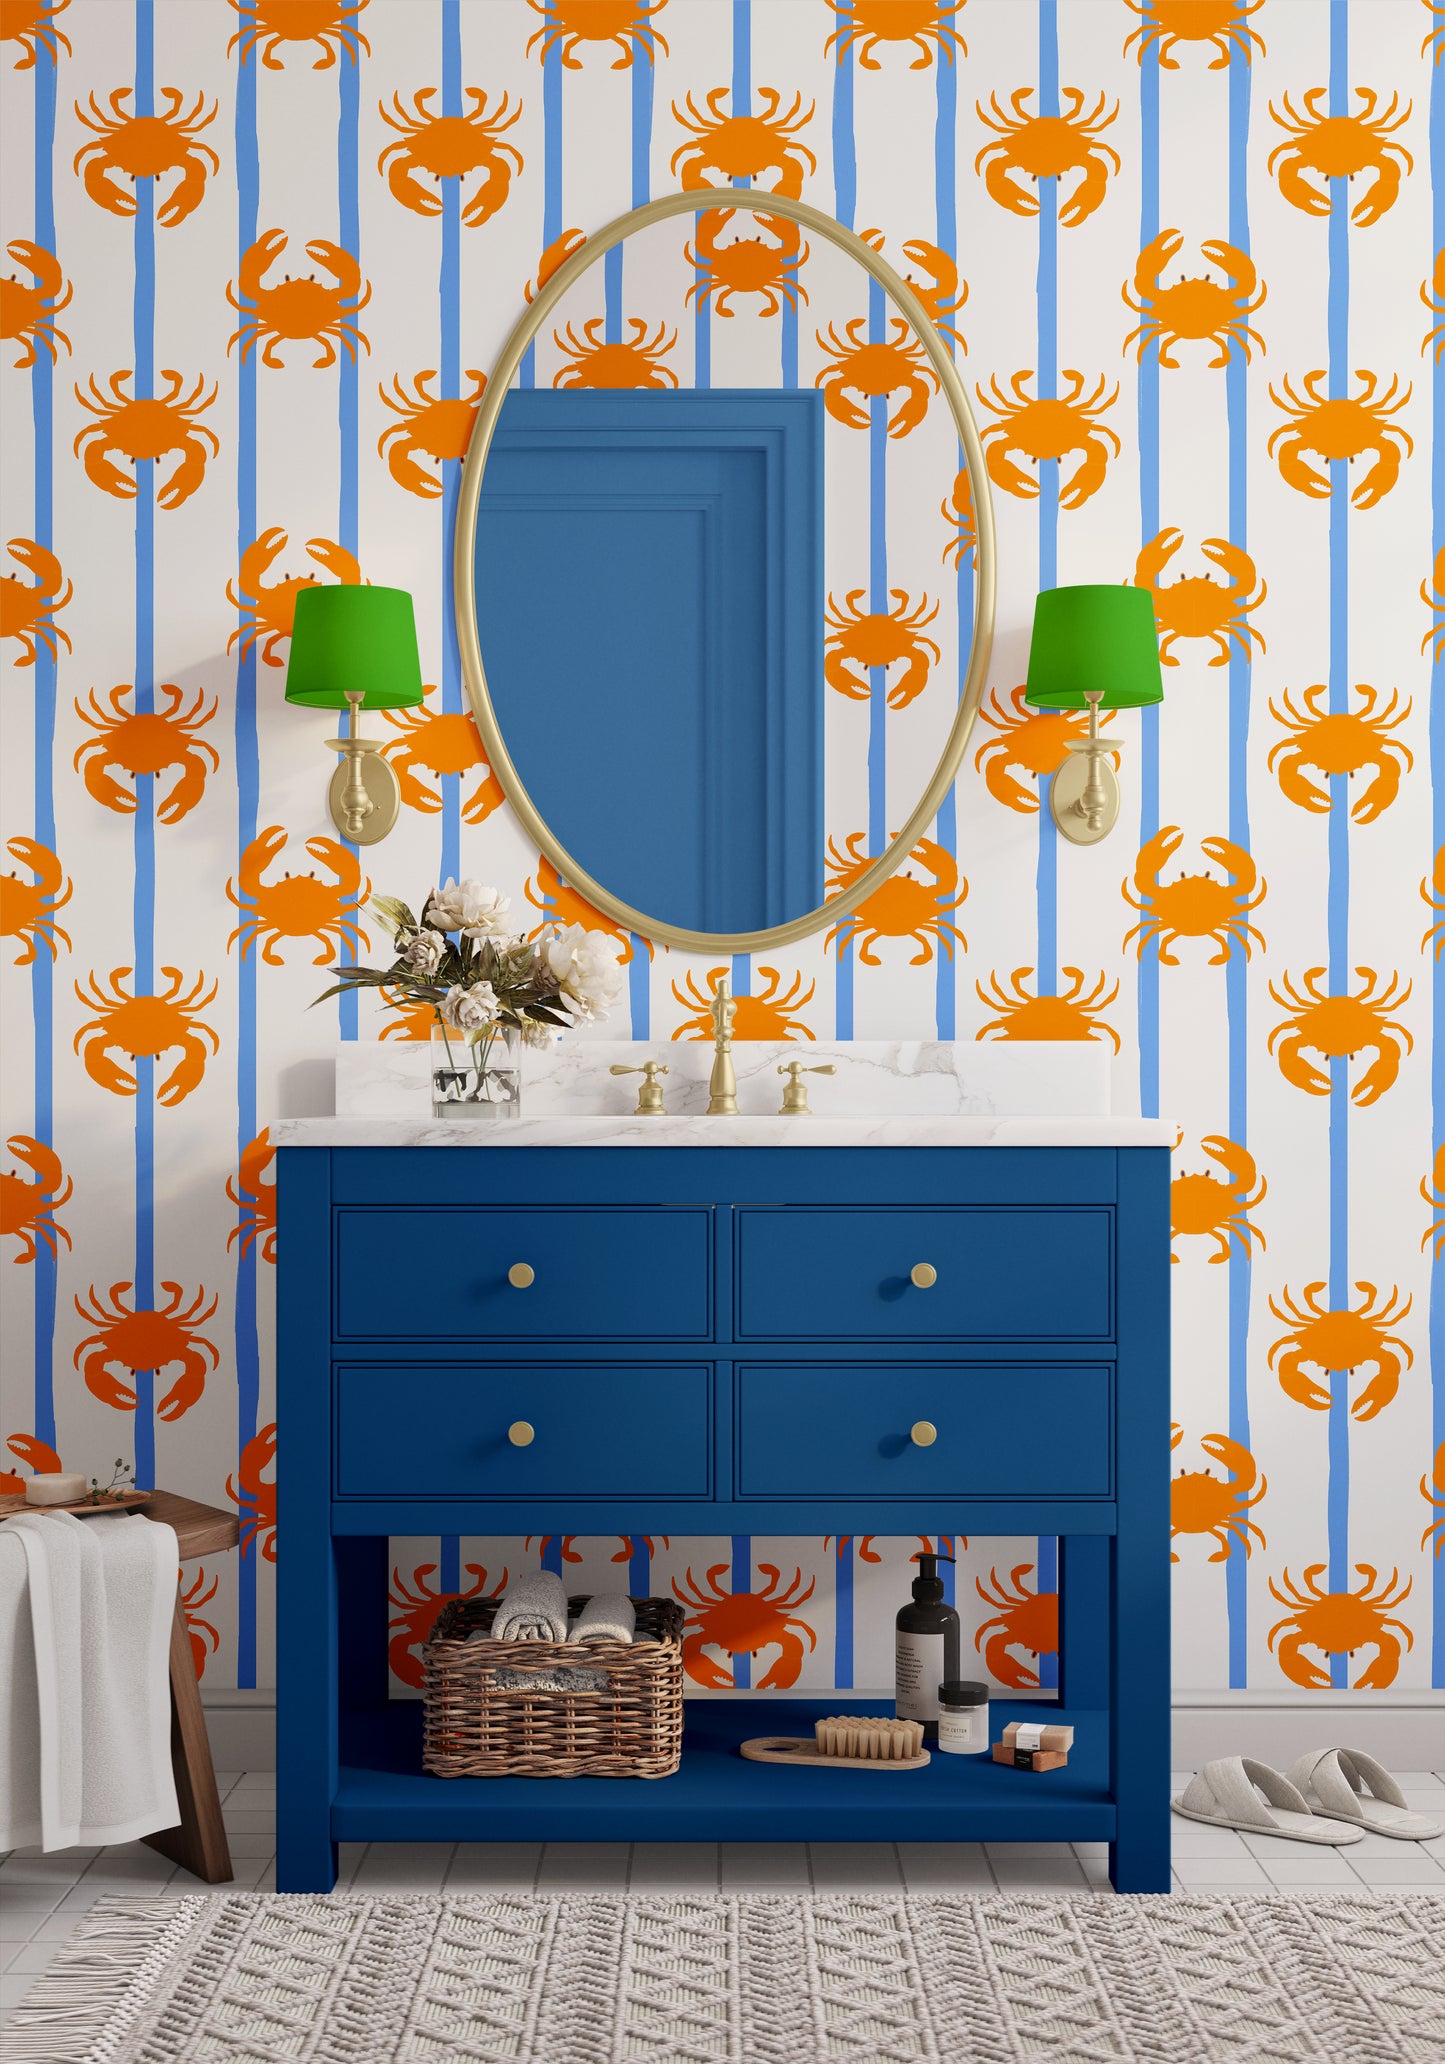 crab nautical wallpaper orange and blue for bathroom kids room or wet room